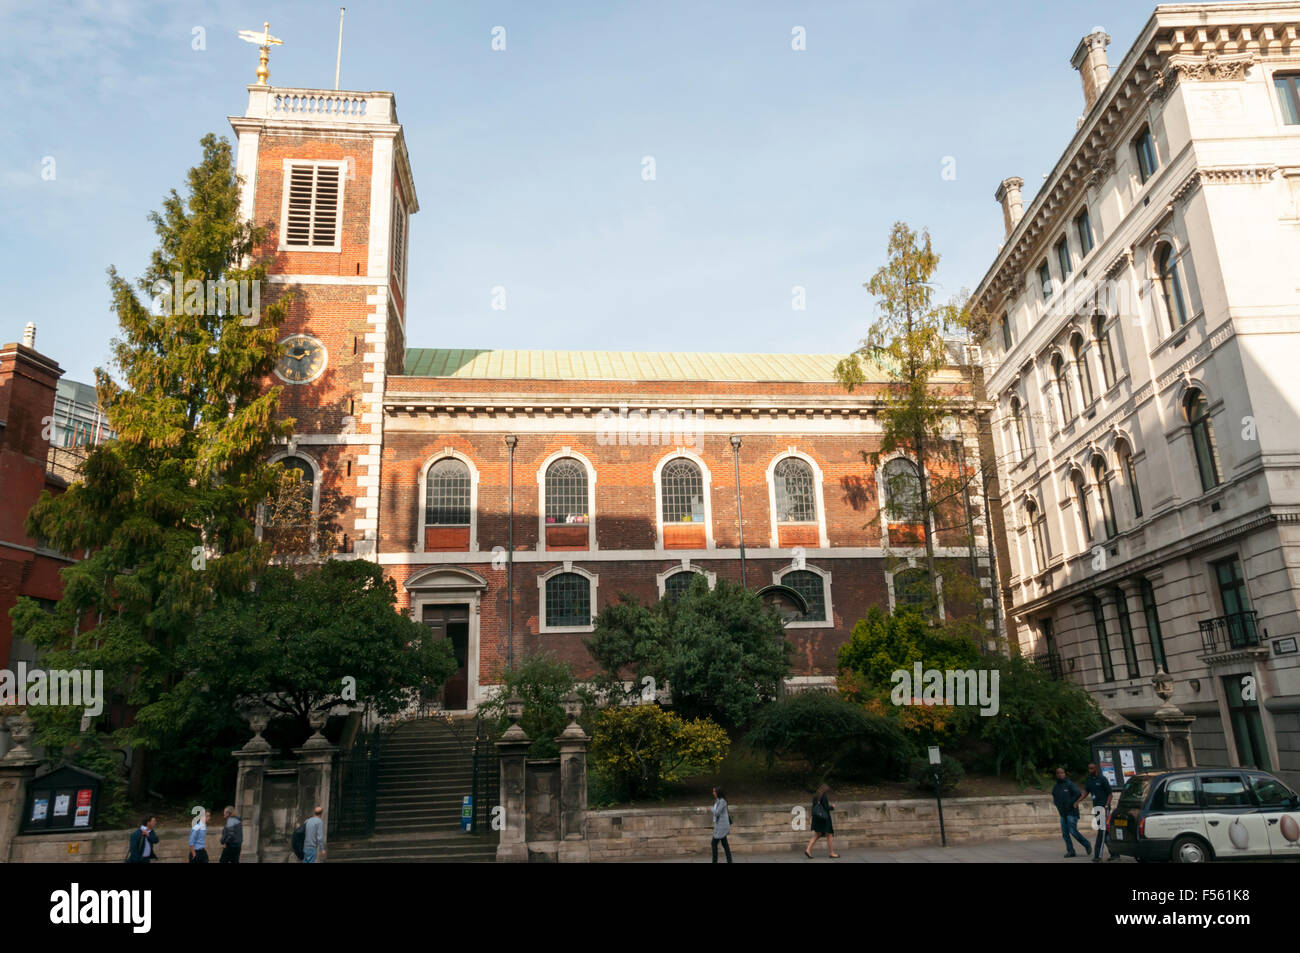 The Wren chuch of St Andrew-by-the-Wardrobe in the City of London. Stock Photo